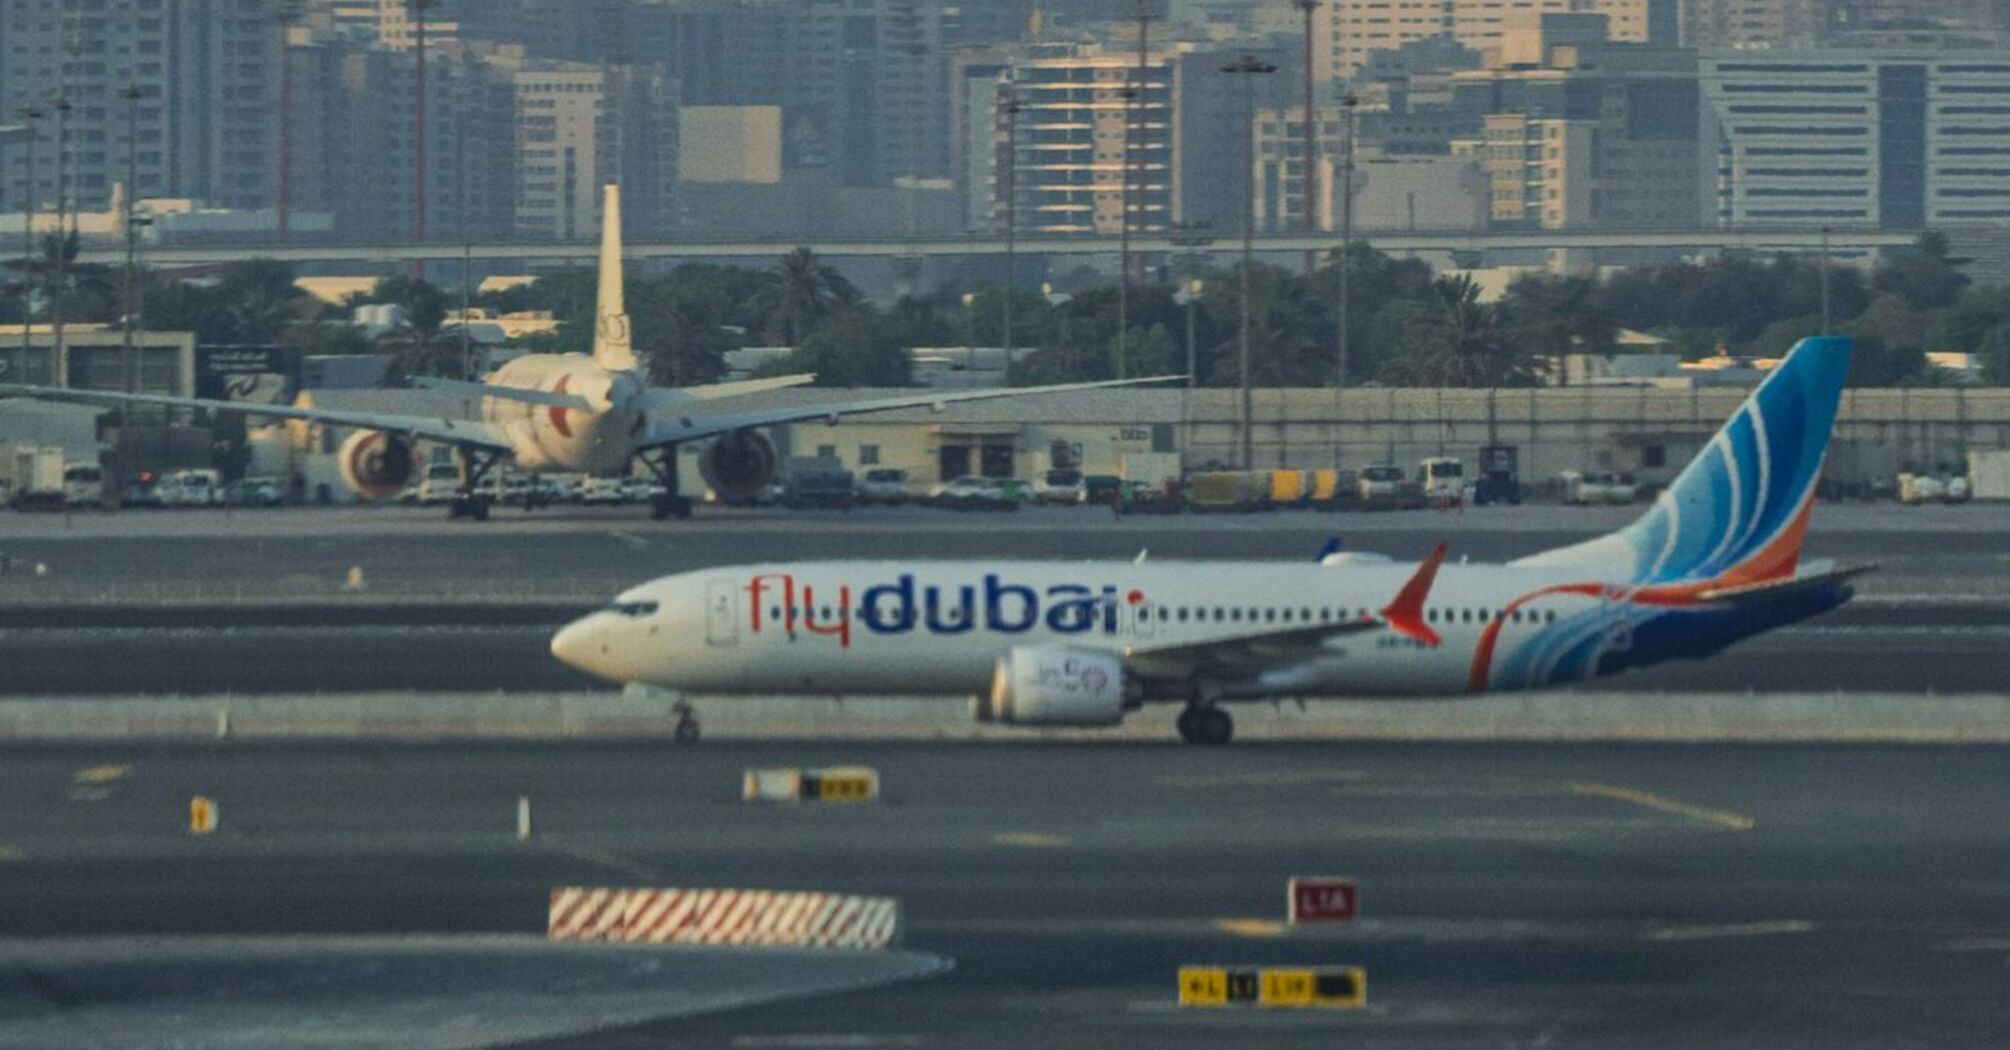 Flydubai airplane on runway with city skyline in the background